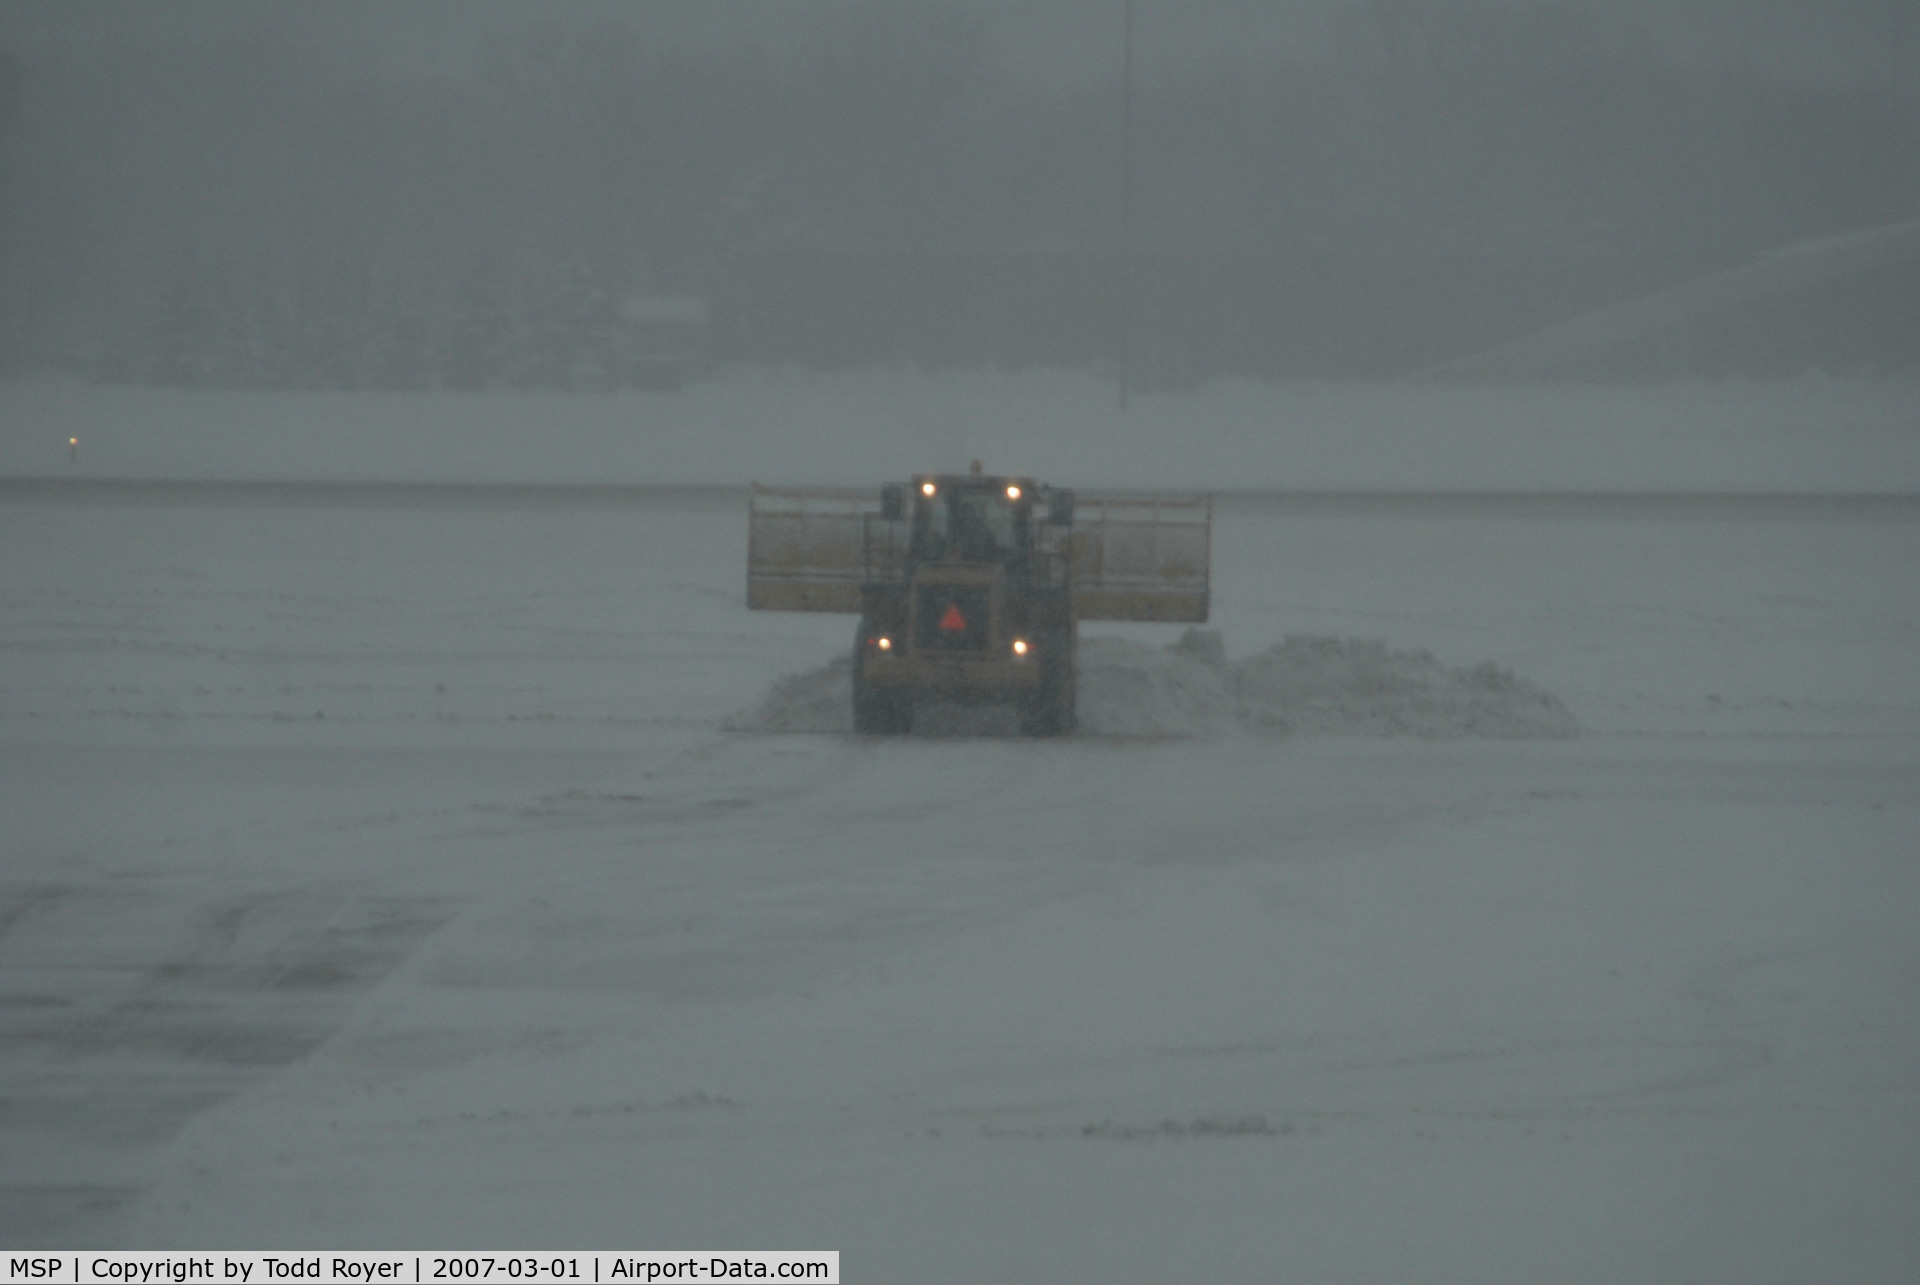 Minneapolis-st Paul Intl/wold-chamberlain Airport (MSP) - Snow removal at MSP